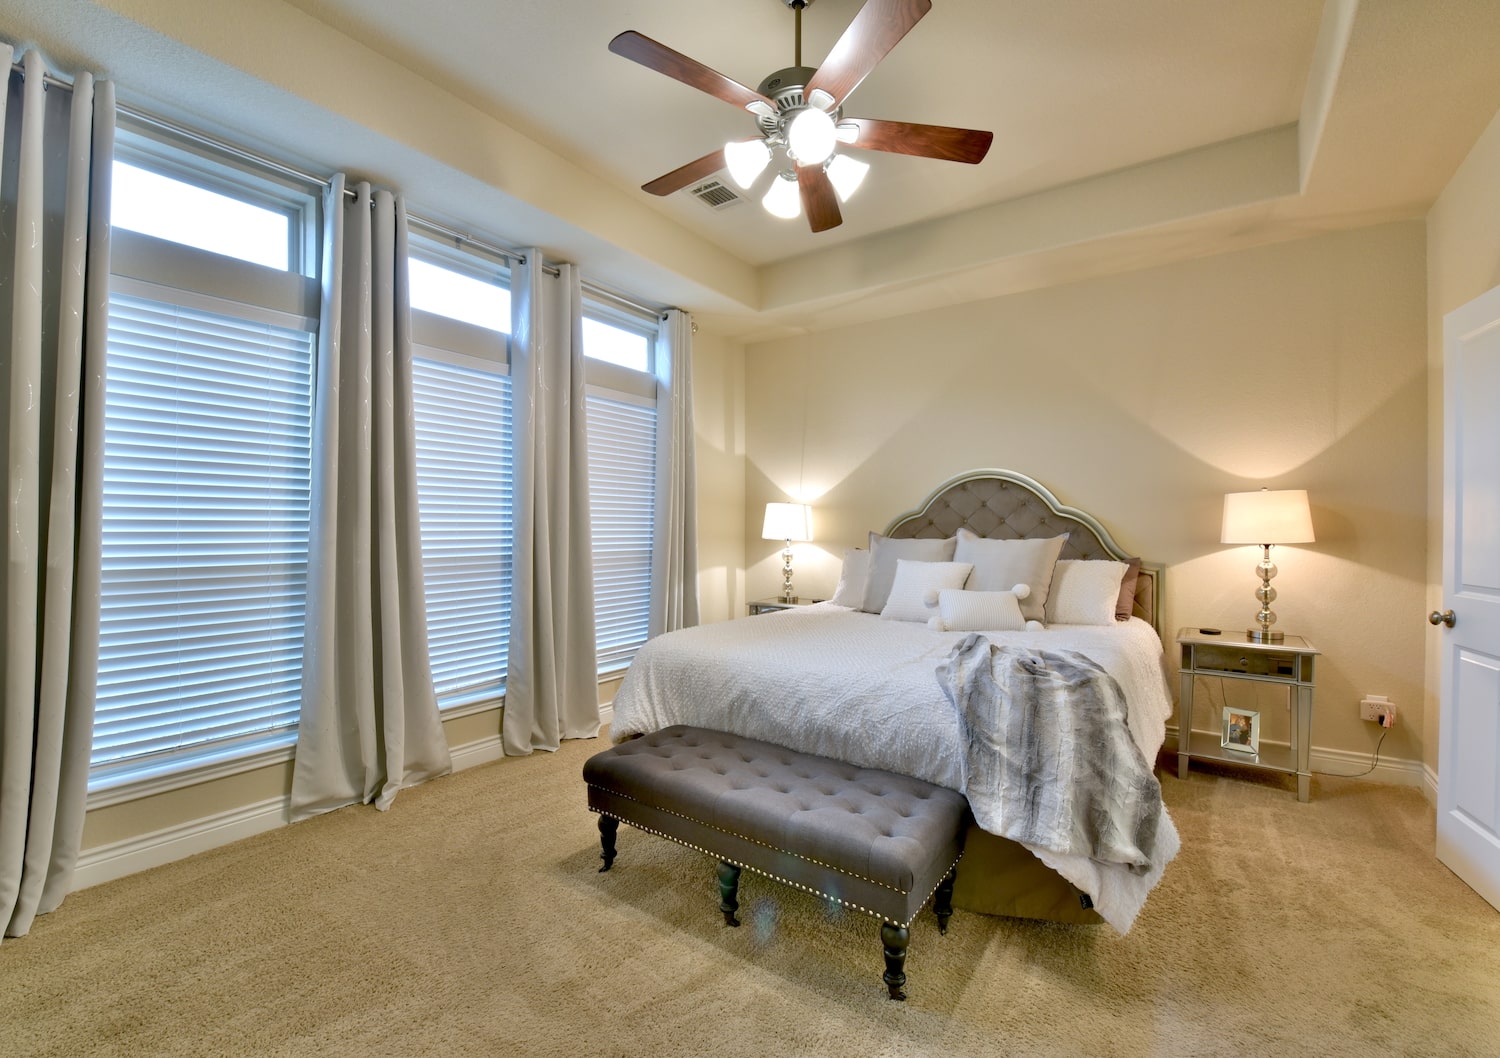 image of master bedroom for real estate photography austin